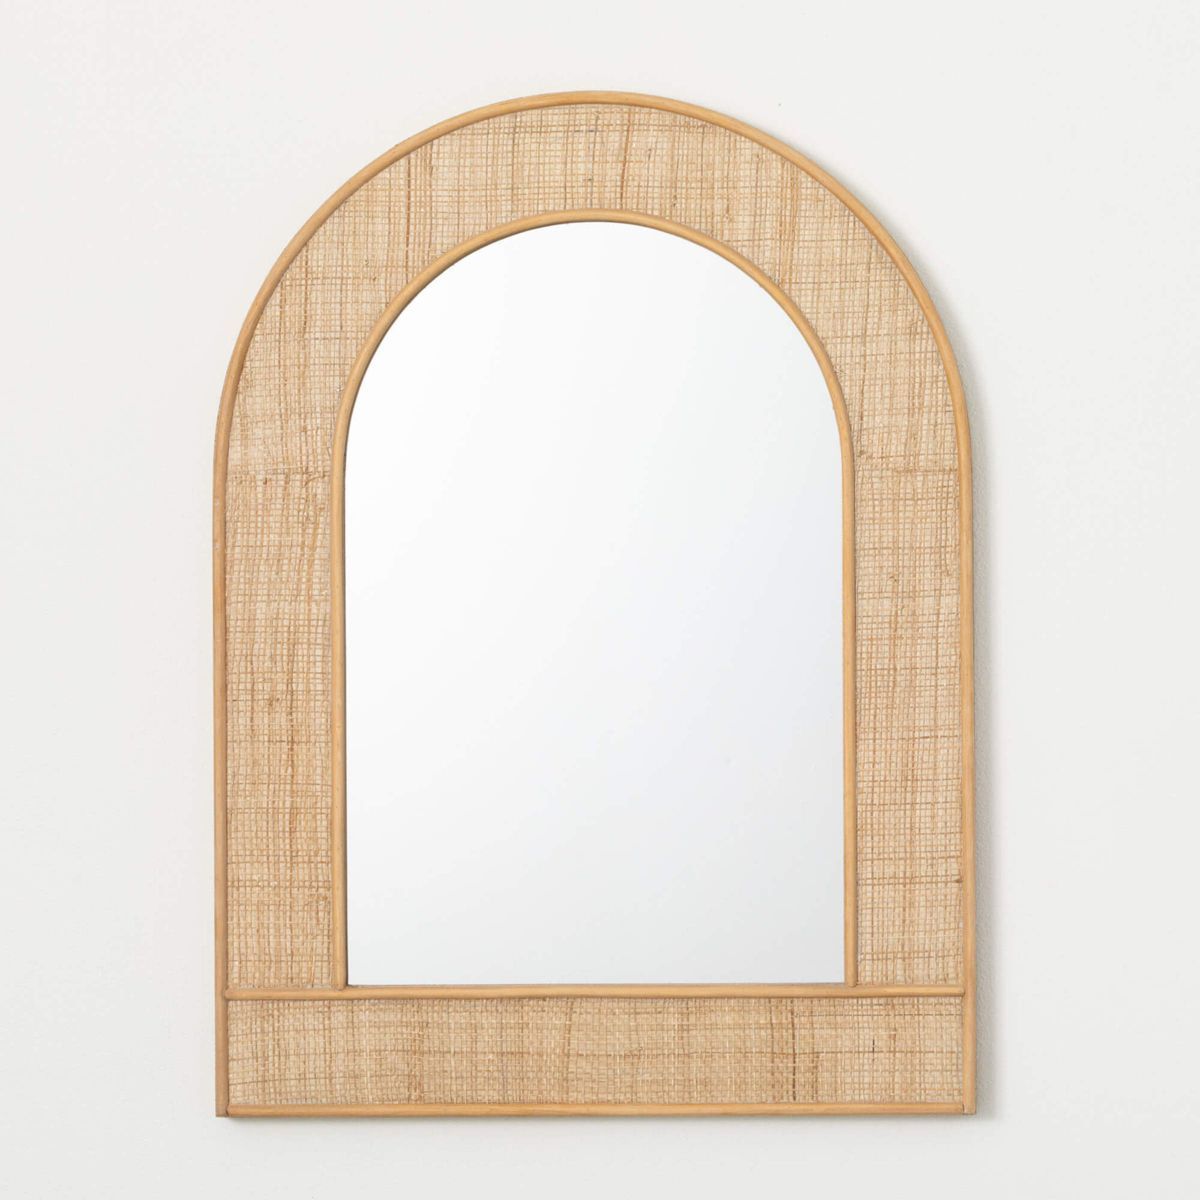 Sullivans 30.75" Rattan Arched Wall Mirror, Wood | Target